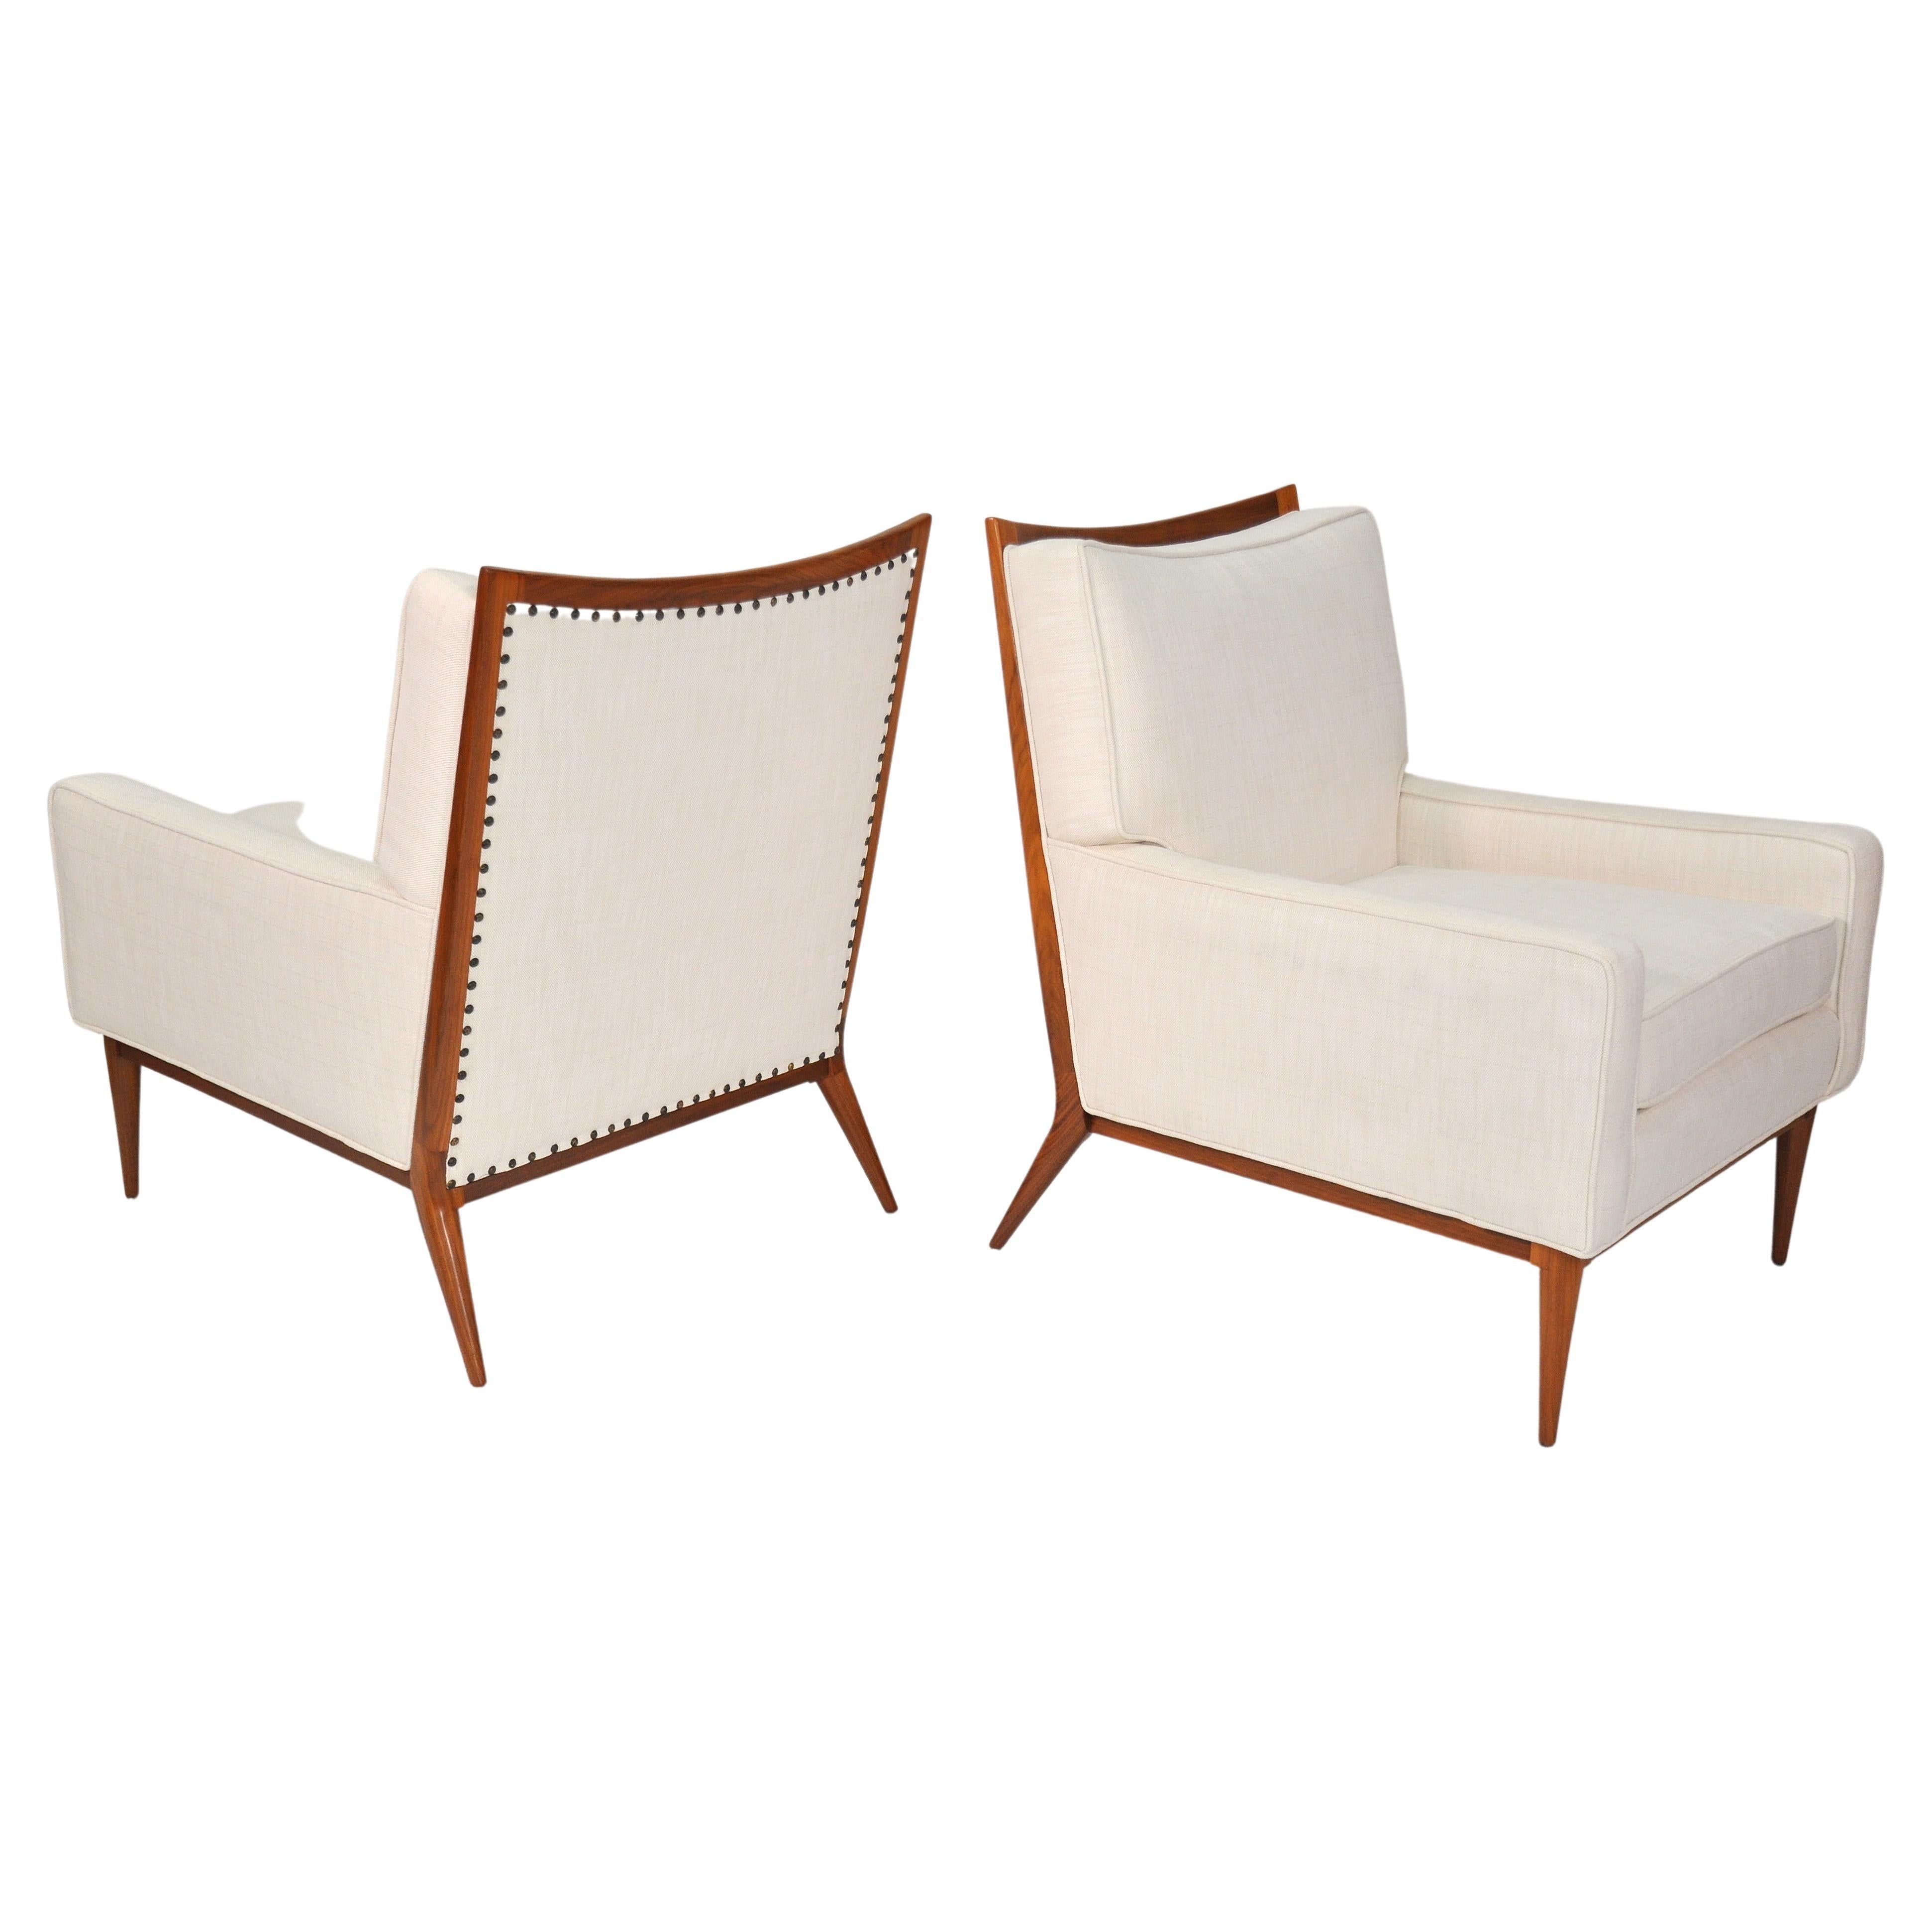 Mid-20th Century Pair of Paul McCobb White Lounge Chairs for Directional, 1950s